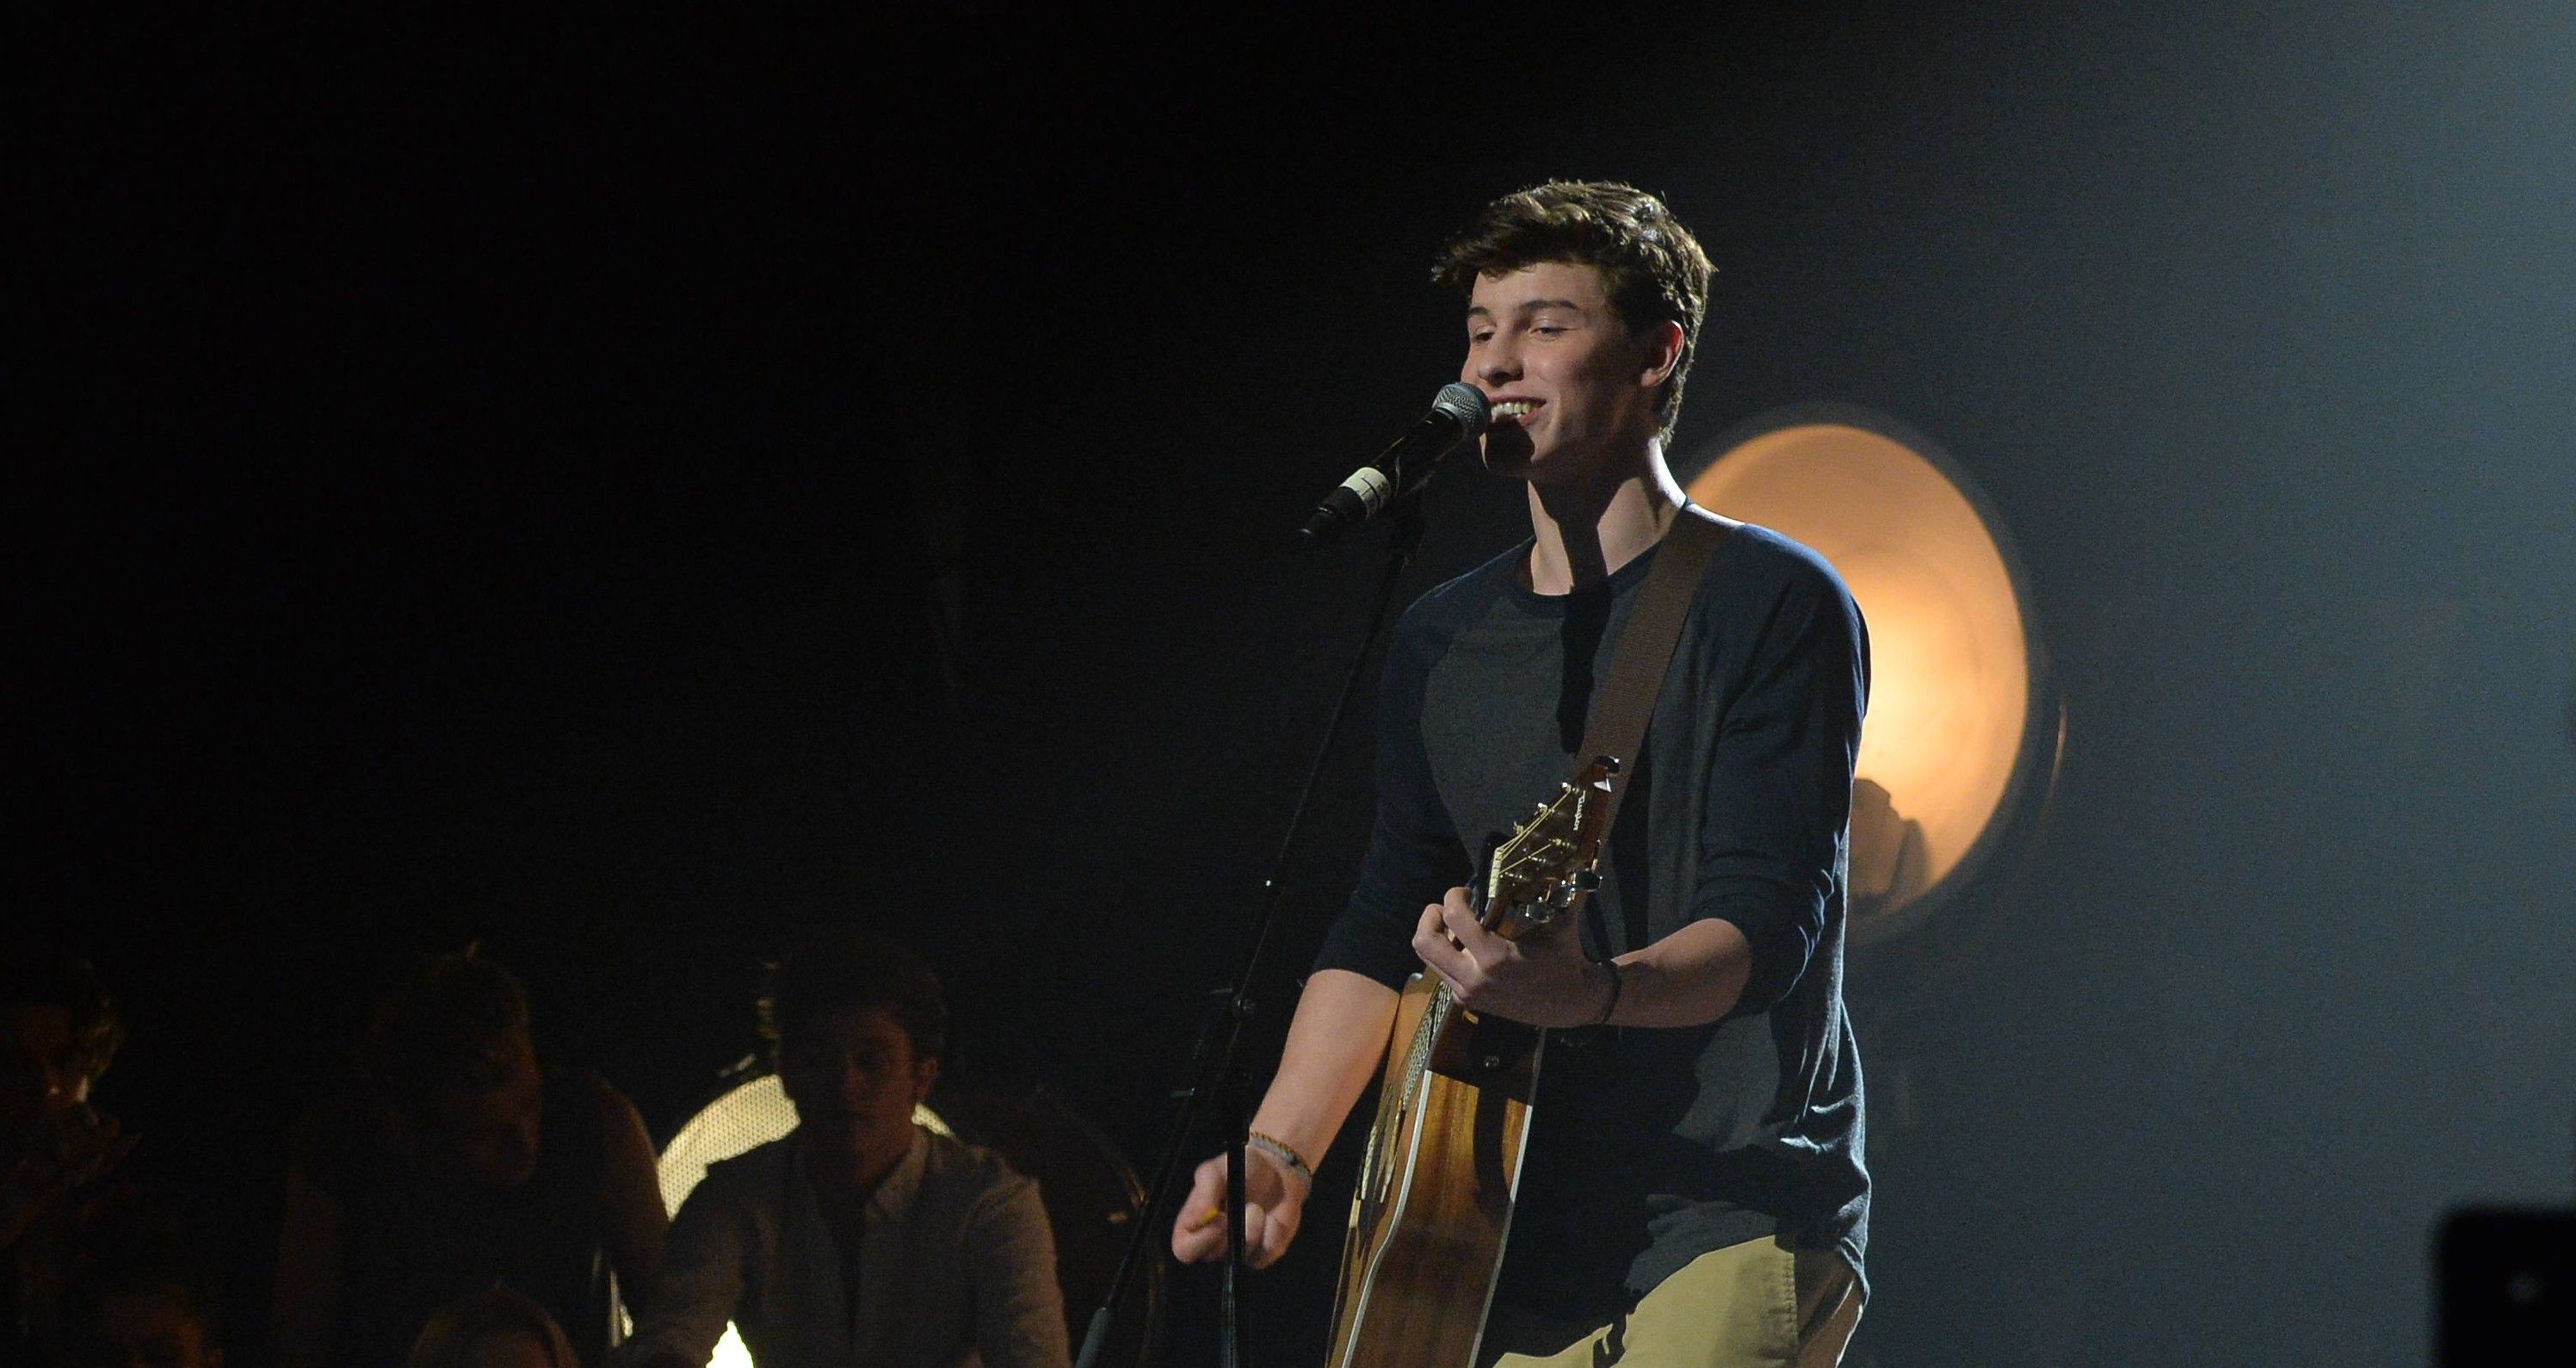 Shawn Mendes Background for Laptop. Shawn Mendes Laptop Wallpaper, Marshawn Lynch Wallpaper and Wallpaper Shawn Belle